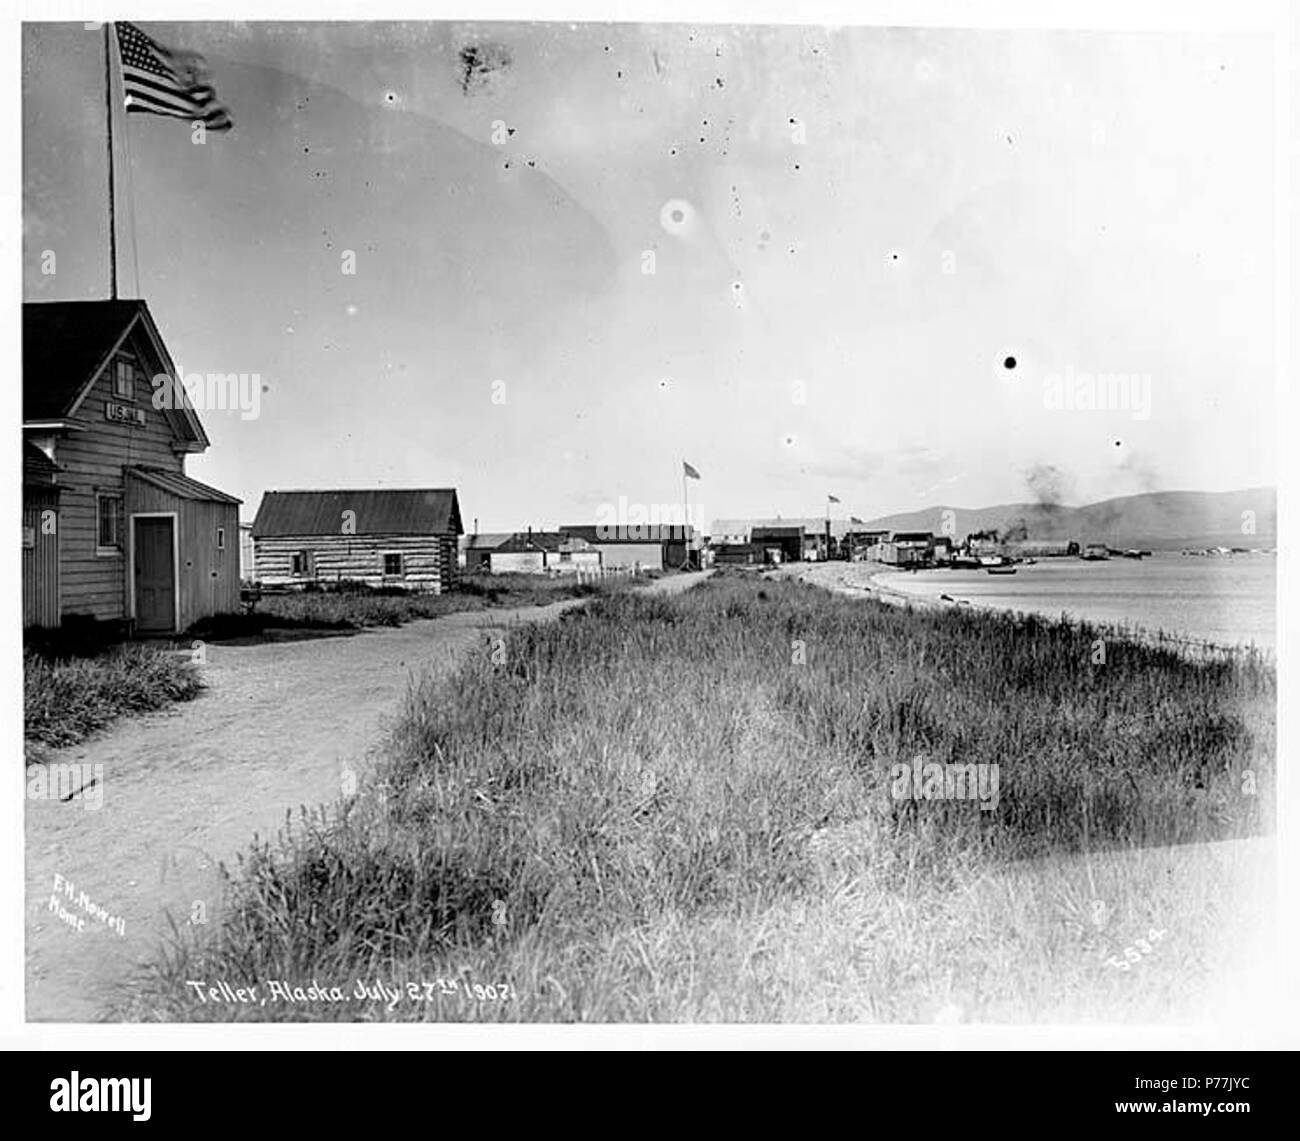 . English: Teller, July 27, 1907 . English: Caption on image: Teller, Alaska, July 27th 1907. F.H. Nowell, Nome, 5534 Teller is located on a spit between Port Clarence and Grantley Harbor, 55 miles southeast of Cape Prince of Wales, Seward Peninsula. Originally called Nooke by the Eskimo people of the area, who used it for the purpose of catching and drying fish, this location was used in the winter of 1866-67 as quarters by Capt. Daniel Libby's section of the Western Union Telegraph Expedition and was known as Libbysville or Libby Station. It is doubtful that any permanent settlement was esta Stock Photo